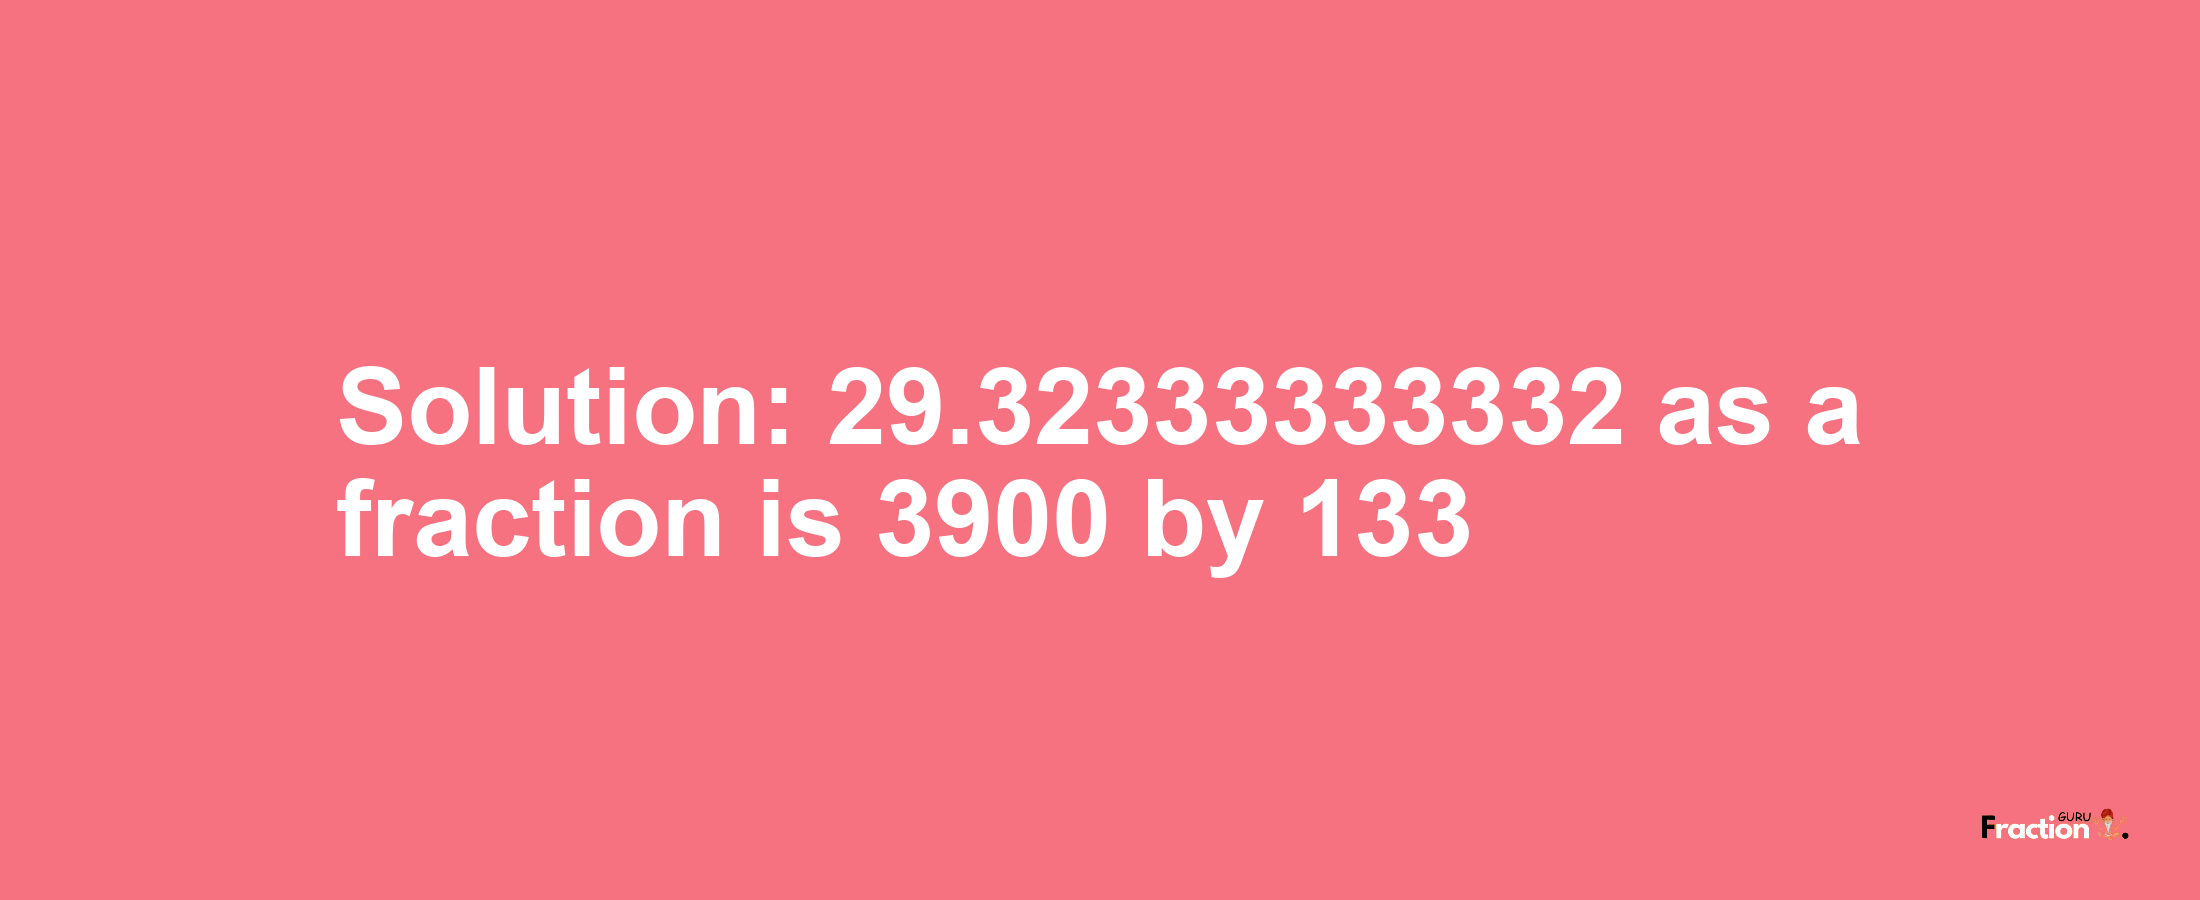 Solution:29.32333333332 as a fraction is 3900/133